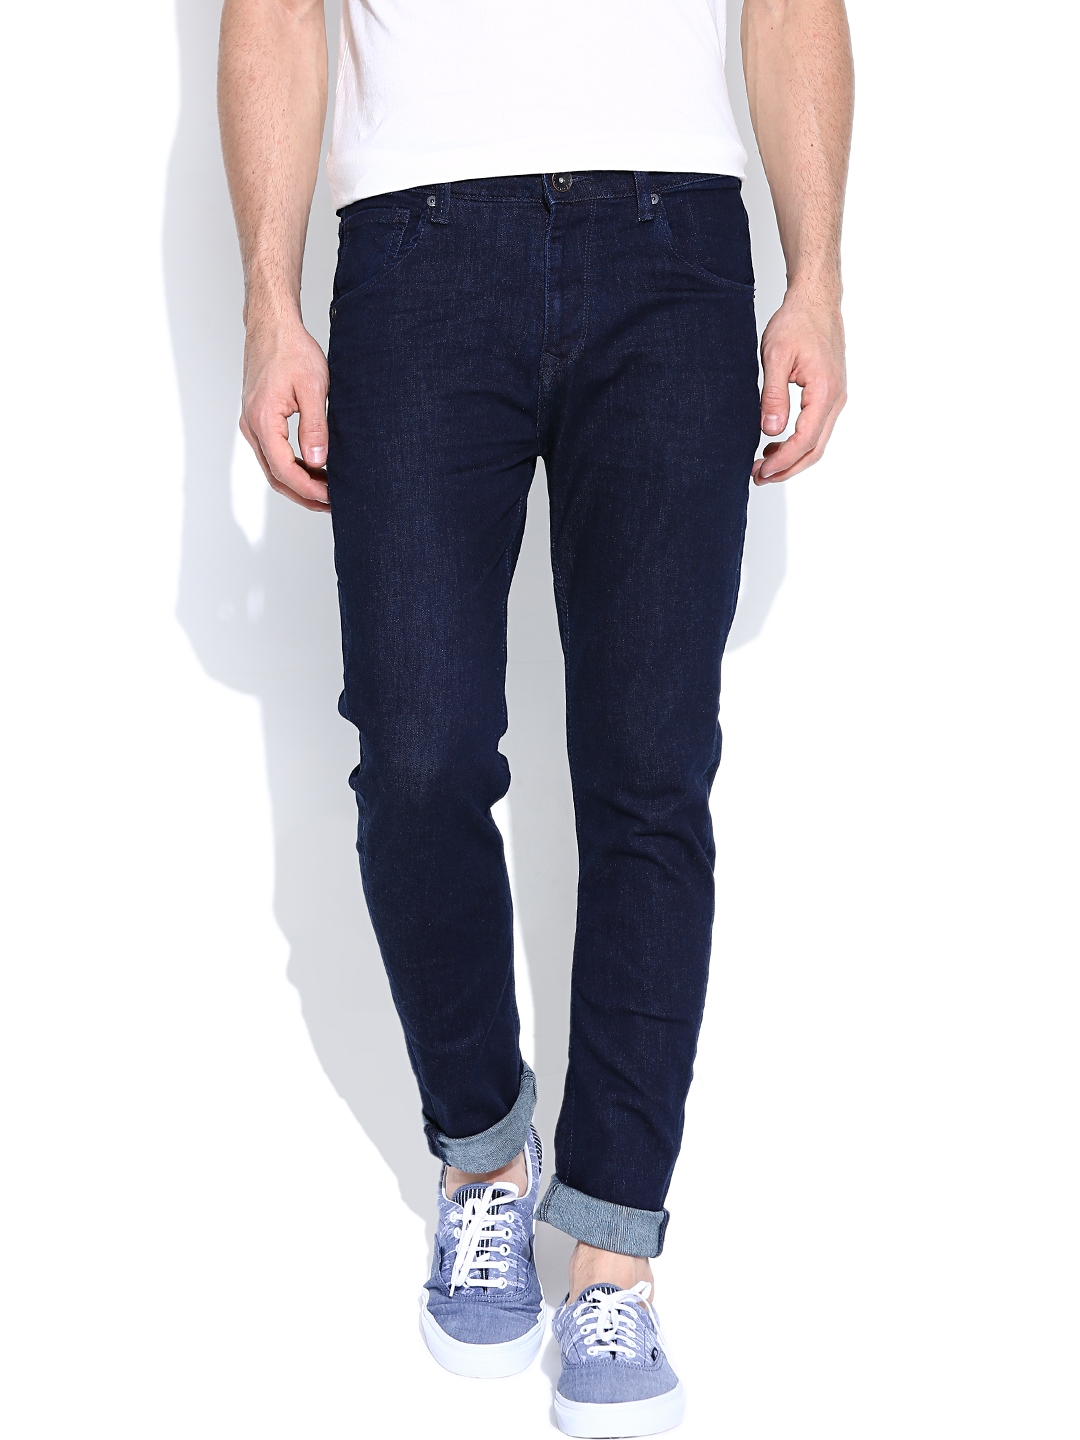 Buy United Colors Of Benetton Navy Carrot Fit Jeans - Jeans for Men ...